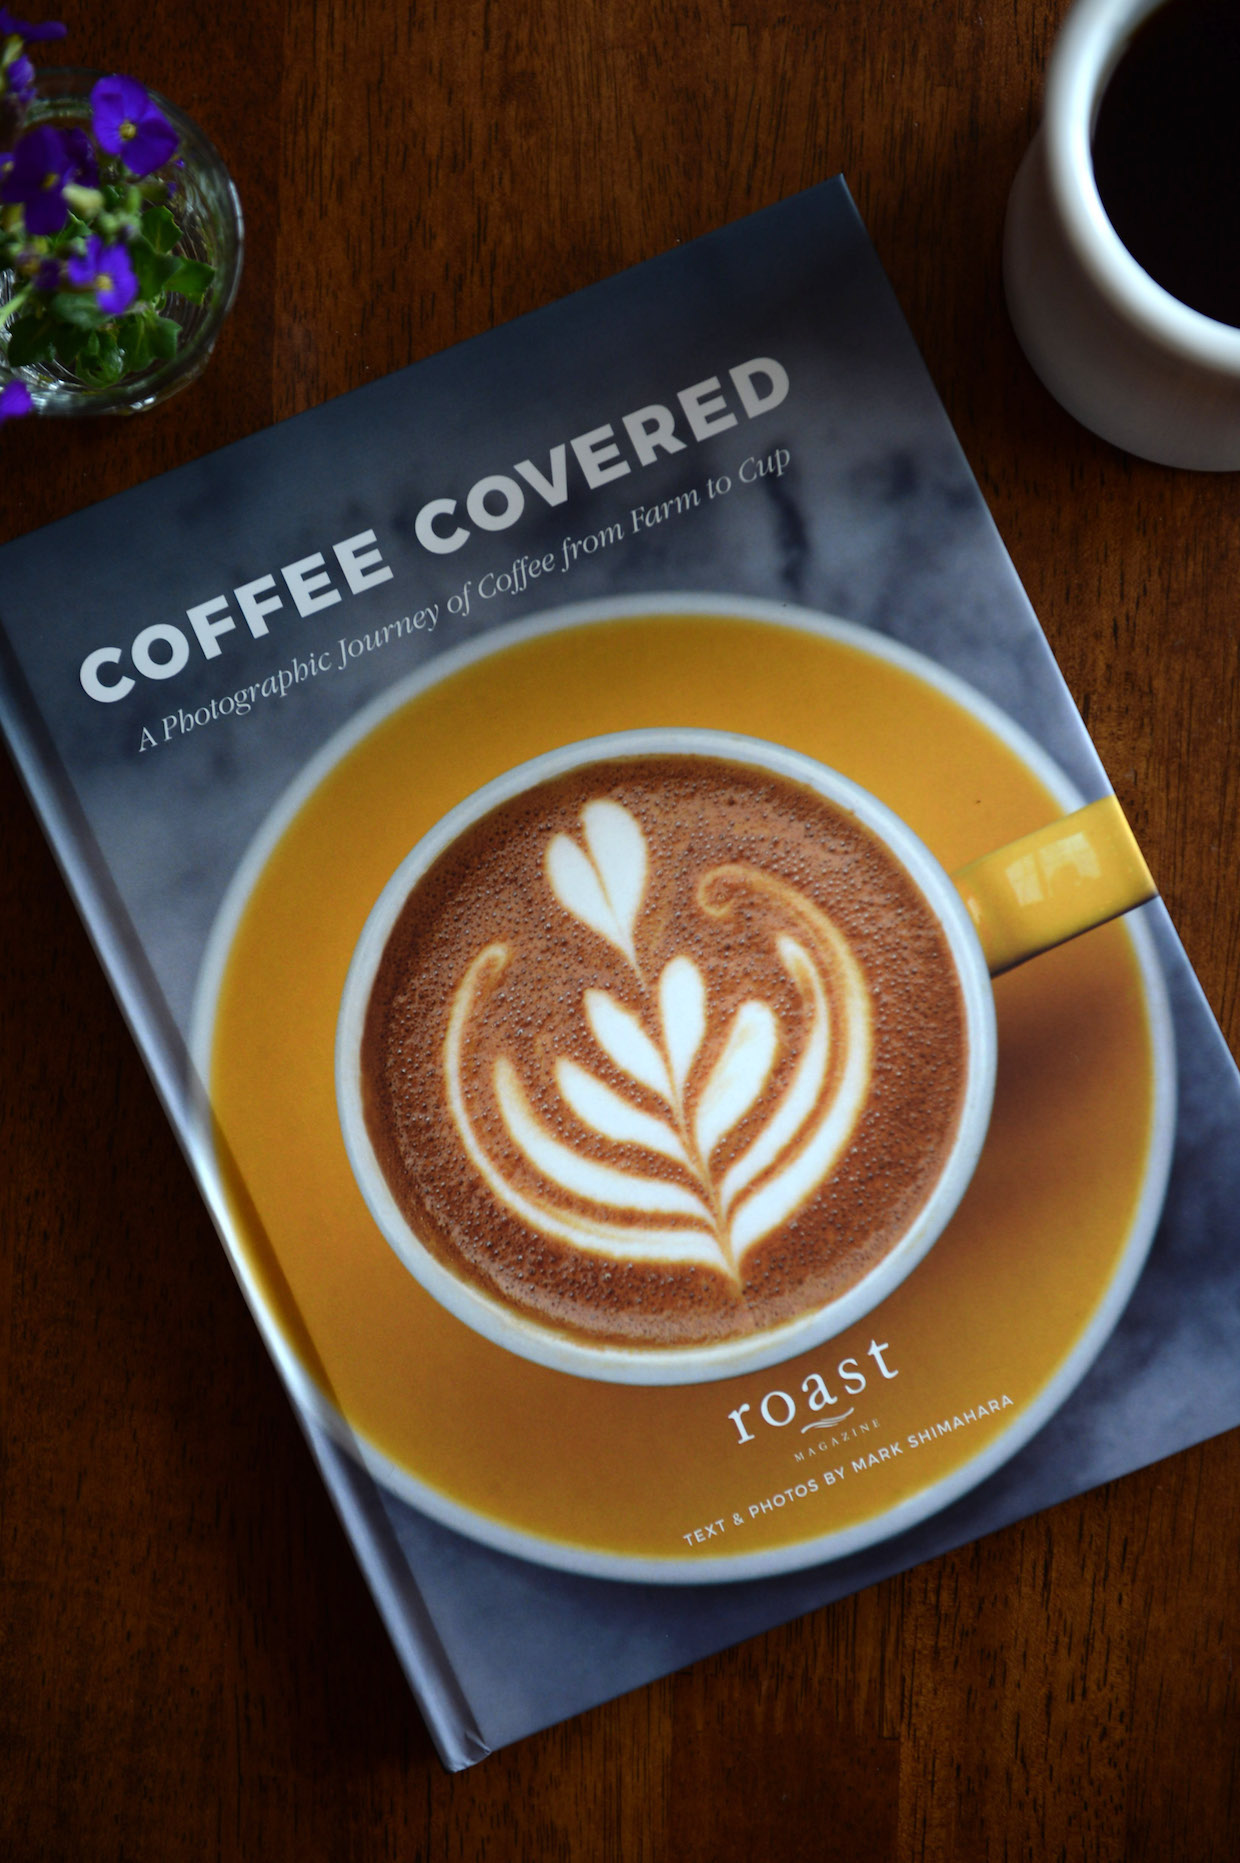 Roast Magazine Launches Coffee Table Book 'Coffee Covered' - Daily ...